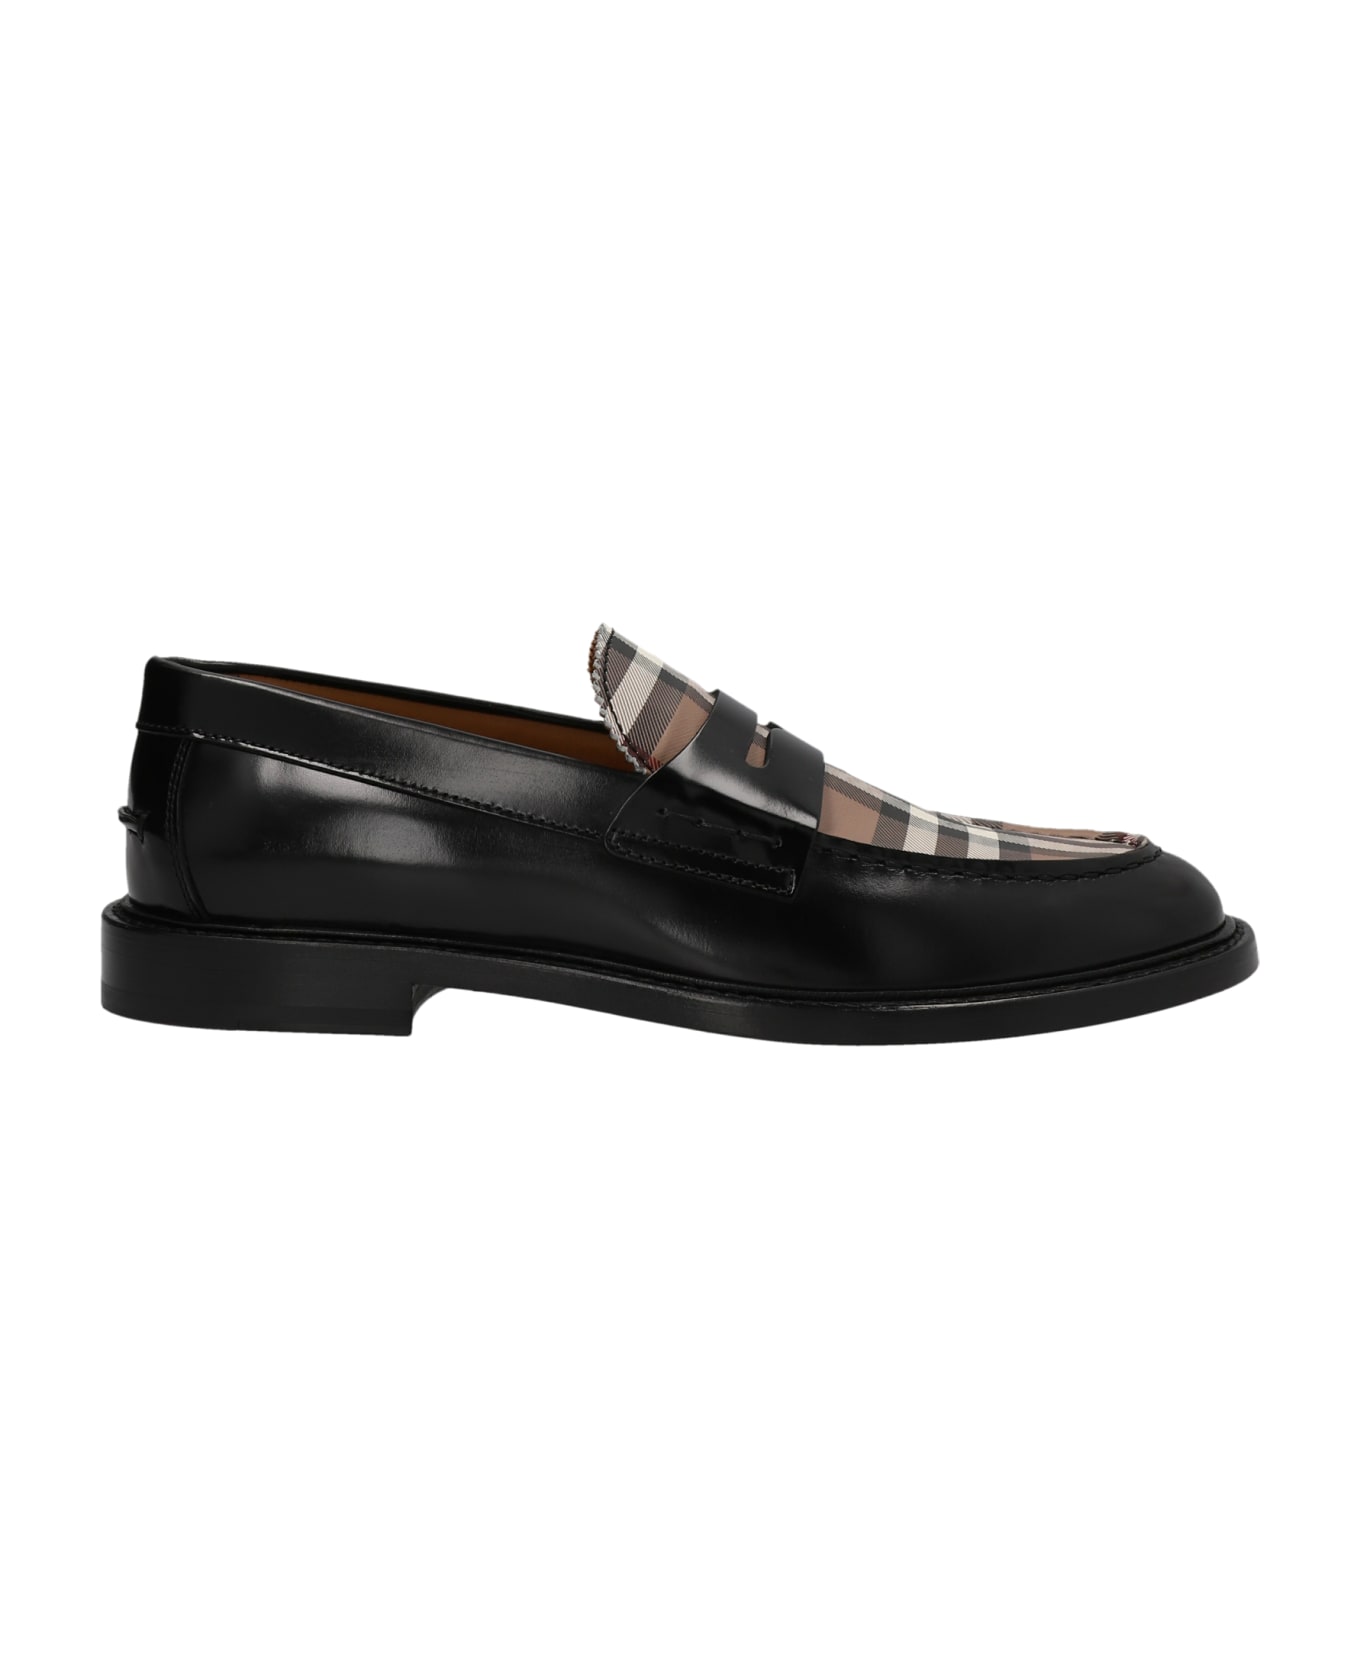 Burberry 'croftwood' Loafers - Black  